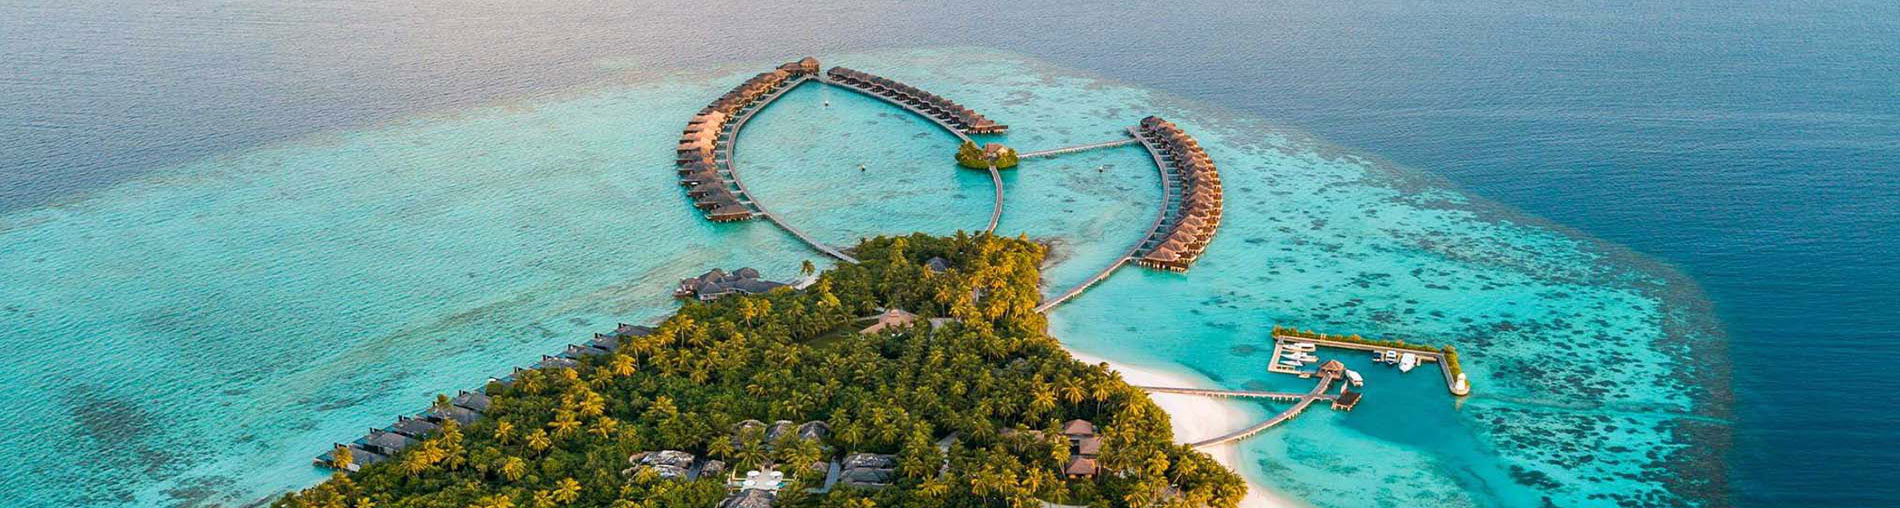 Maldives Tour Package From India